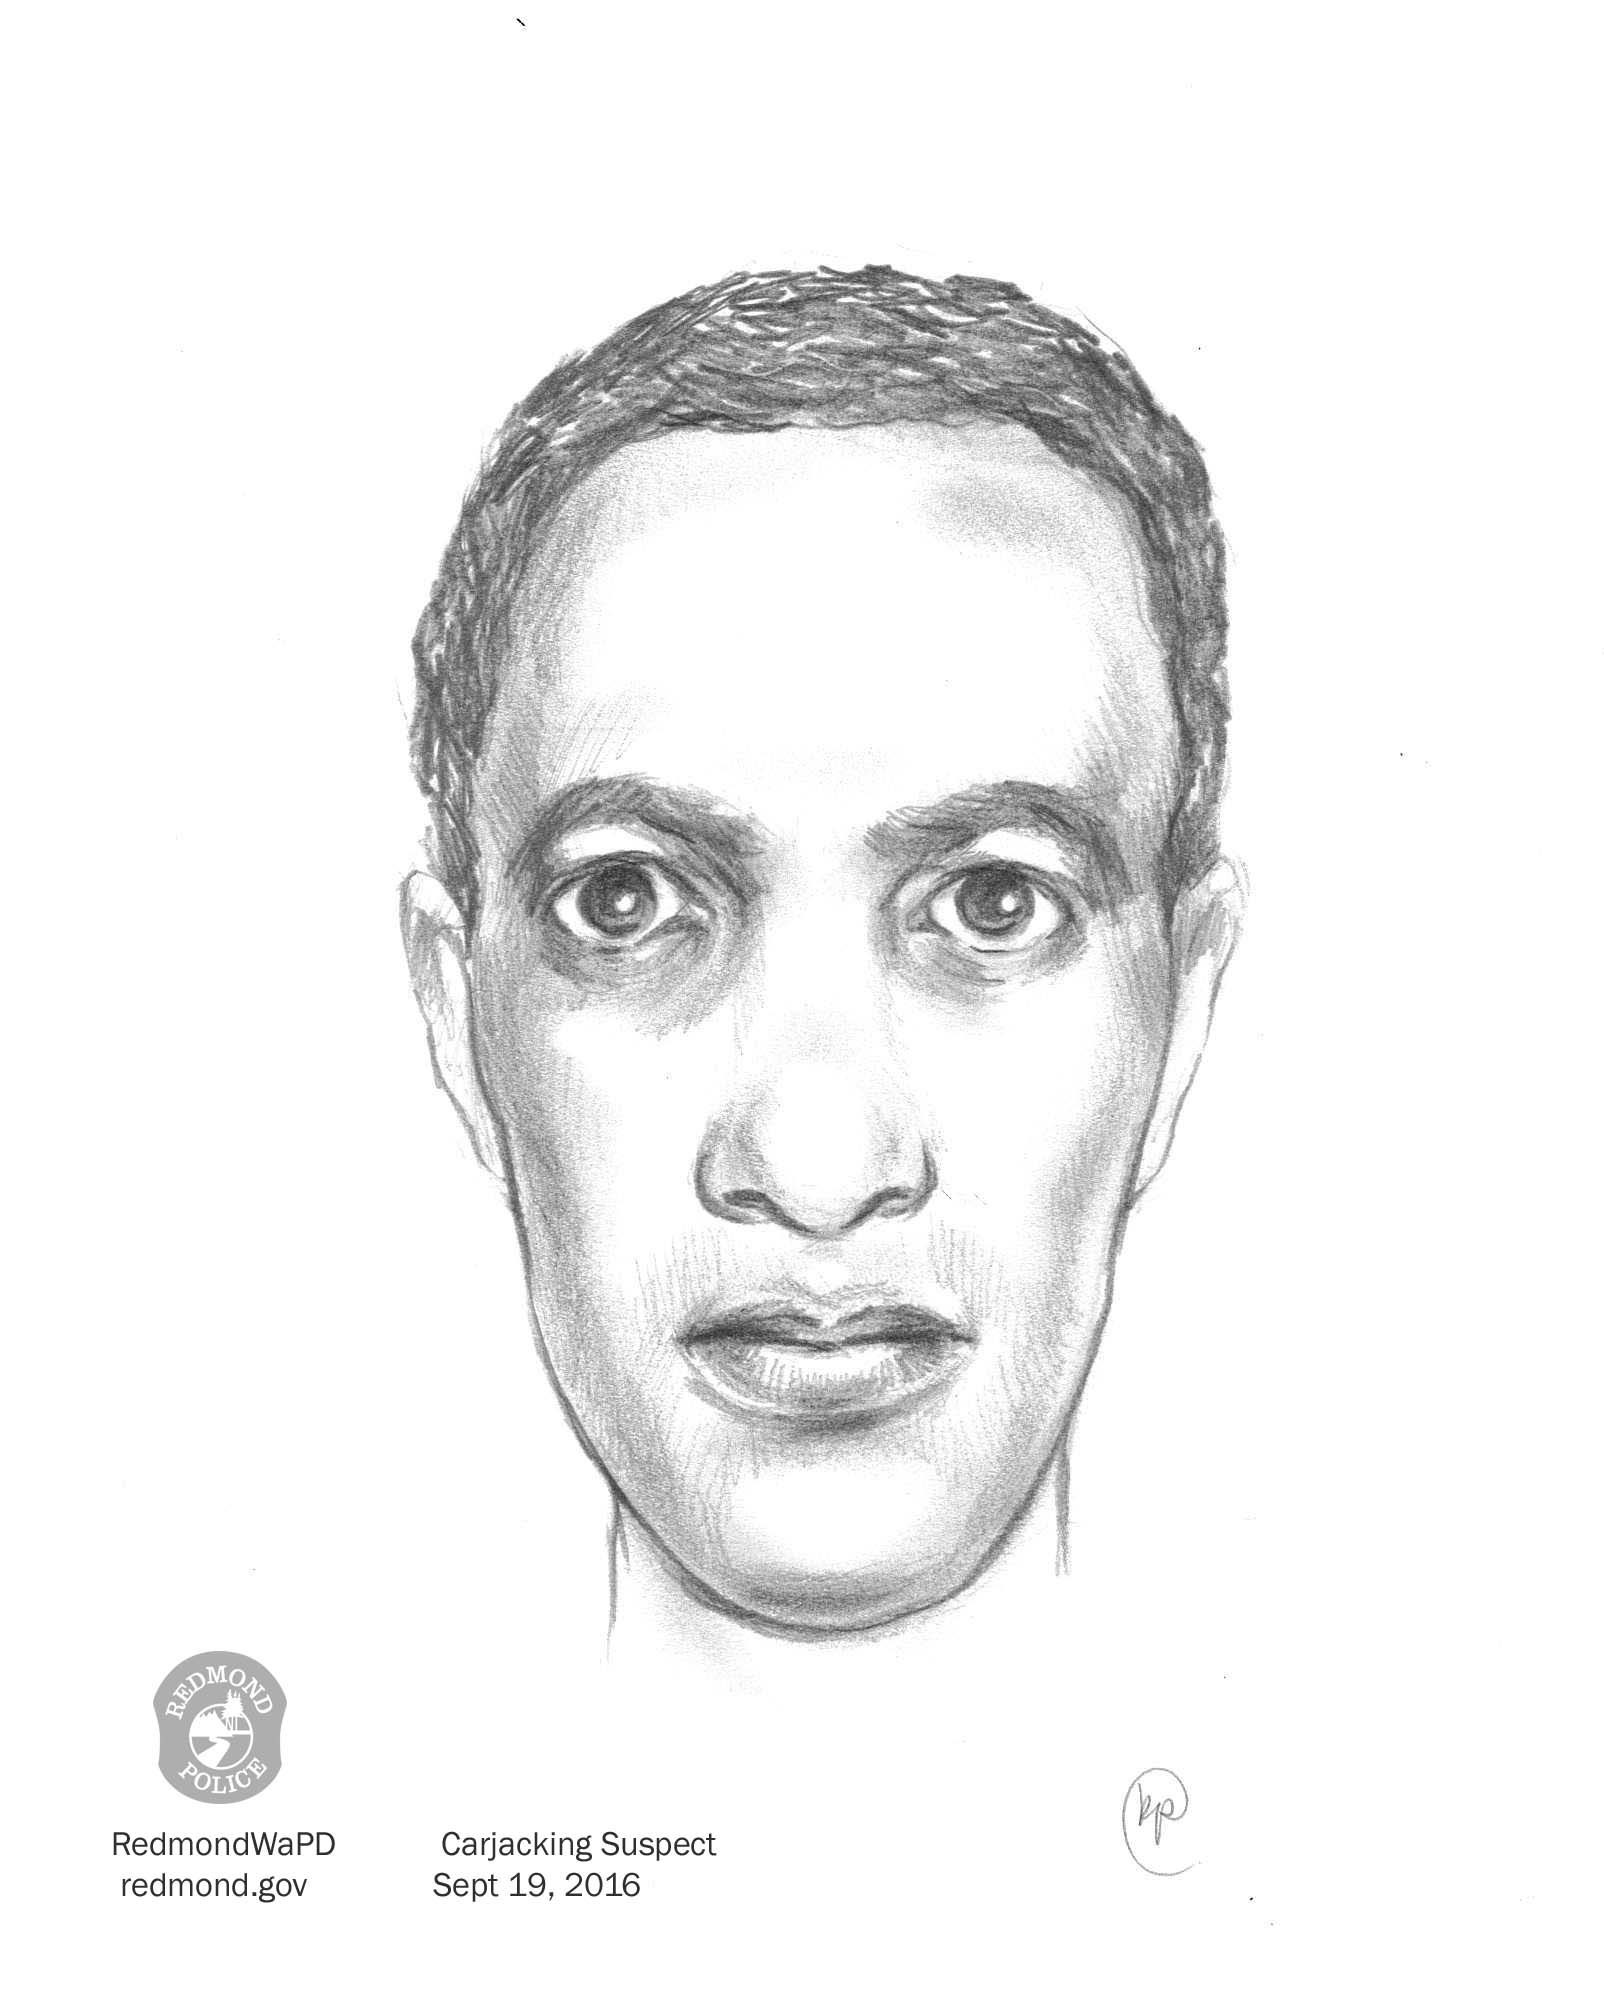 A sketch of the carjacking suspect